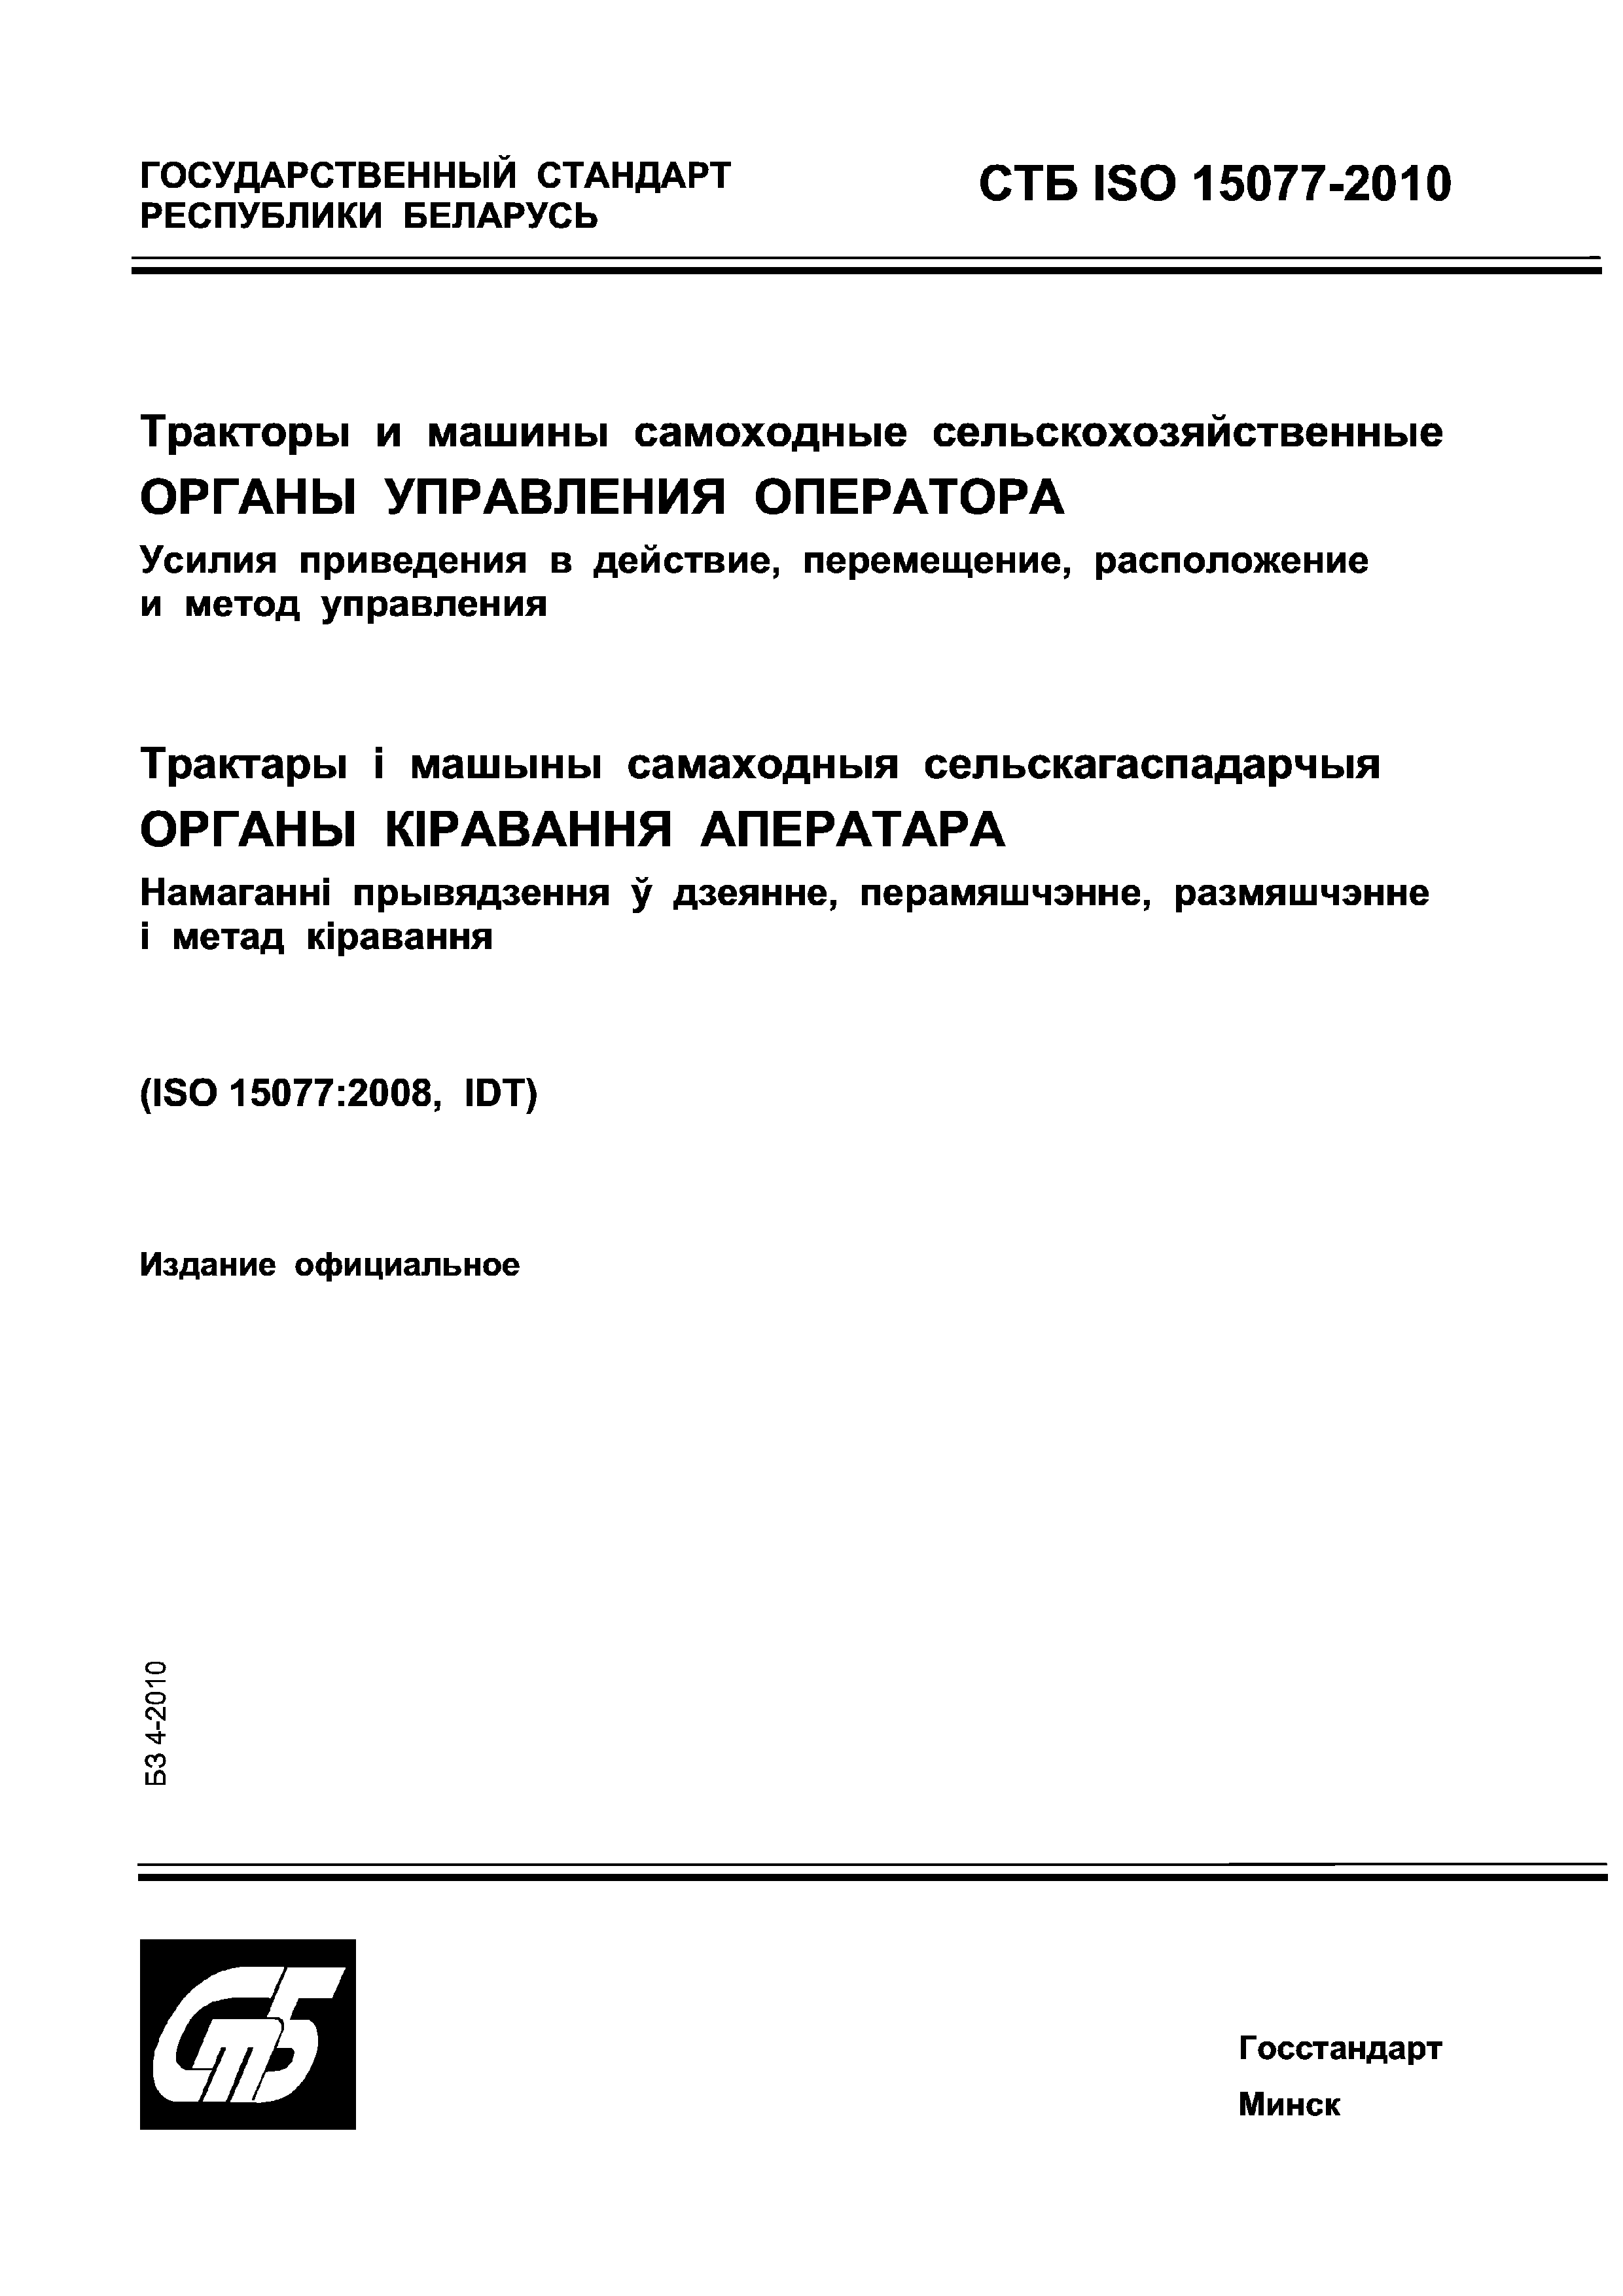 СТБ ISO 15077-2010